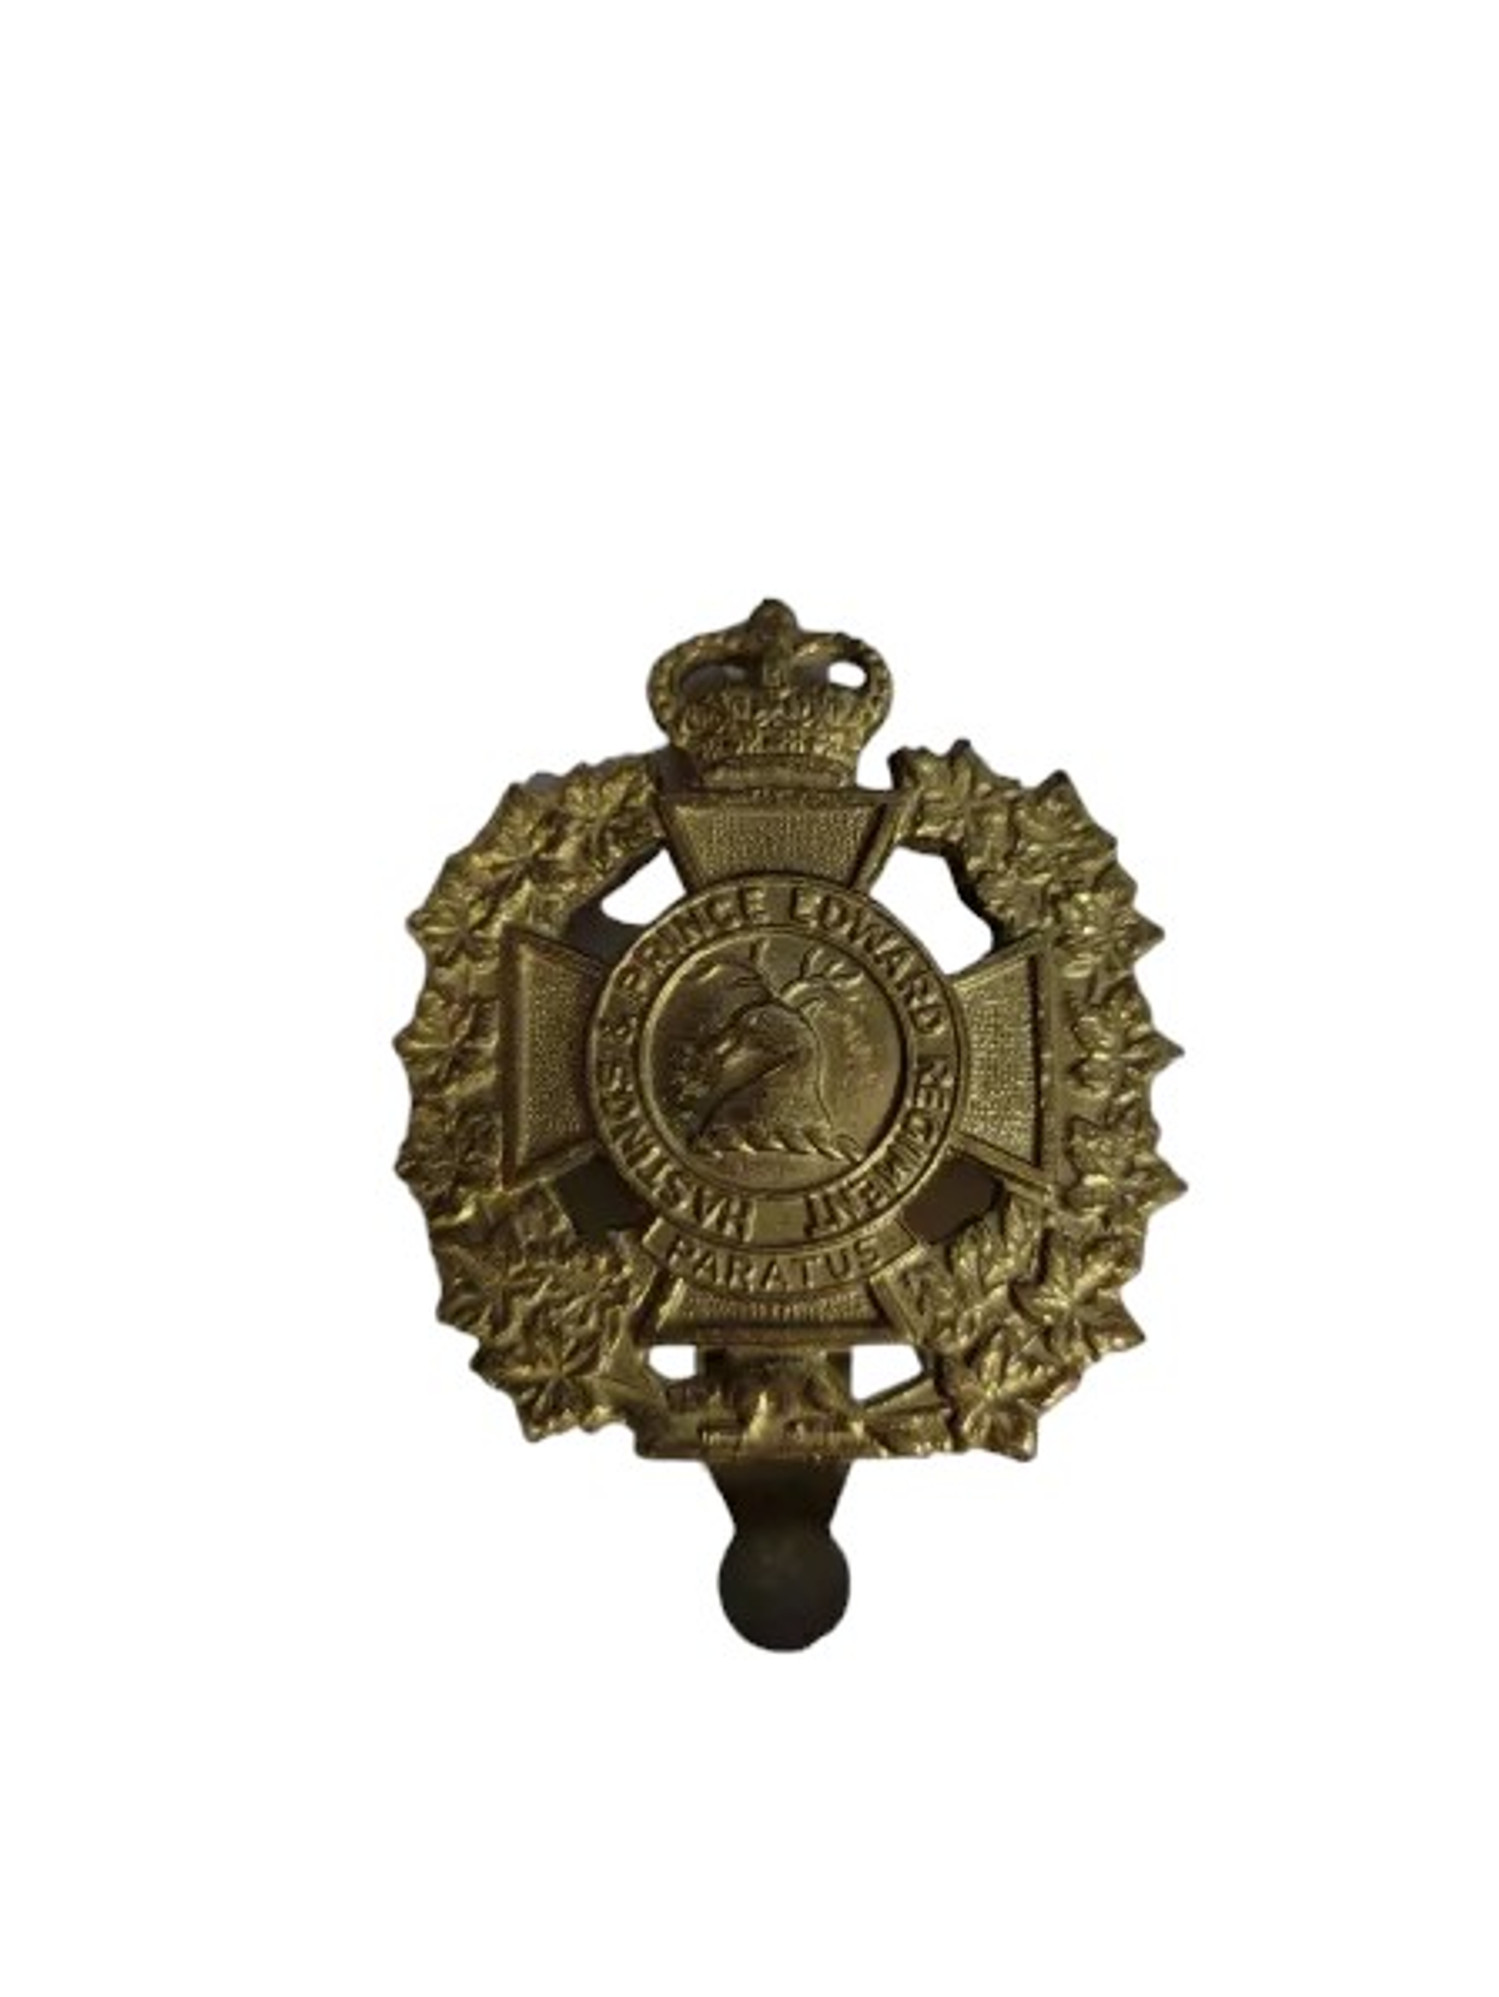 Canadian Armed Forces Queens Crown Hastings Prince Edward Regiment Insignia Badge